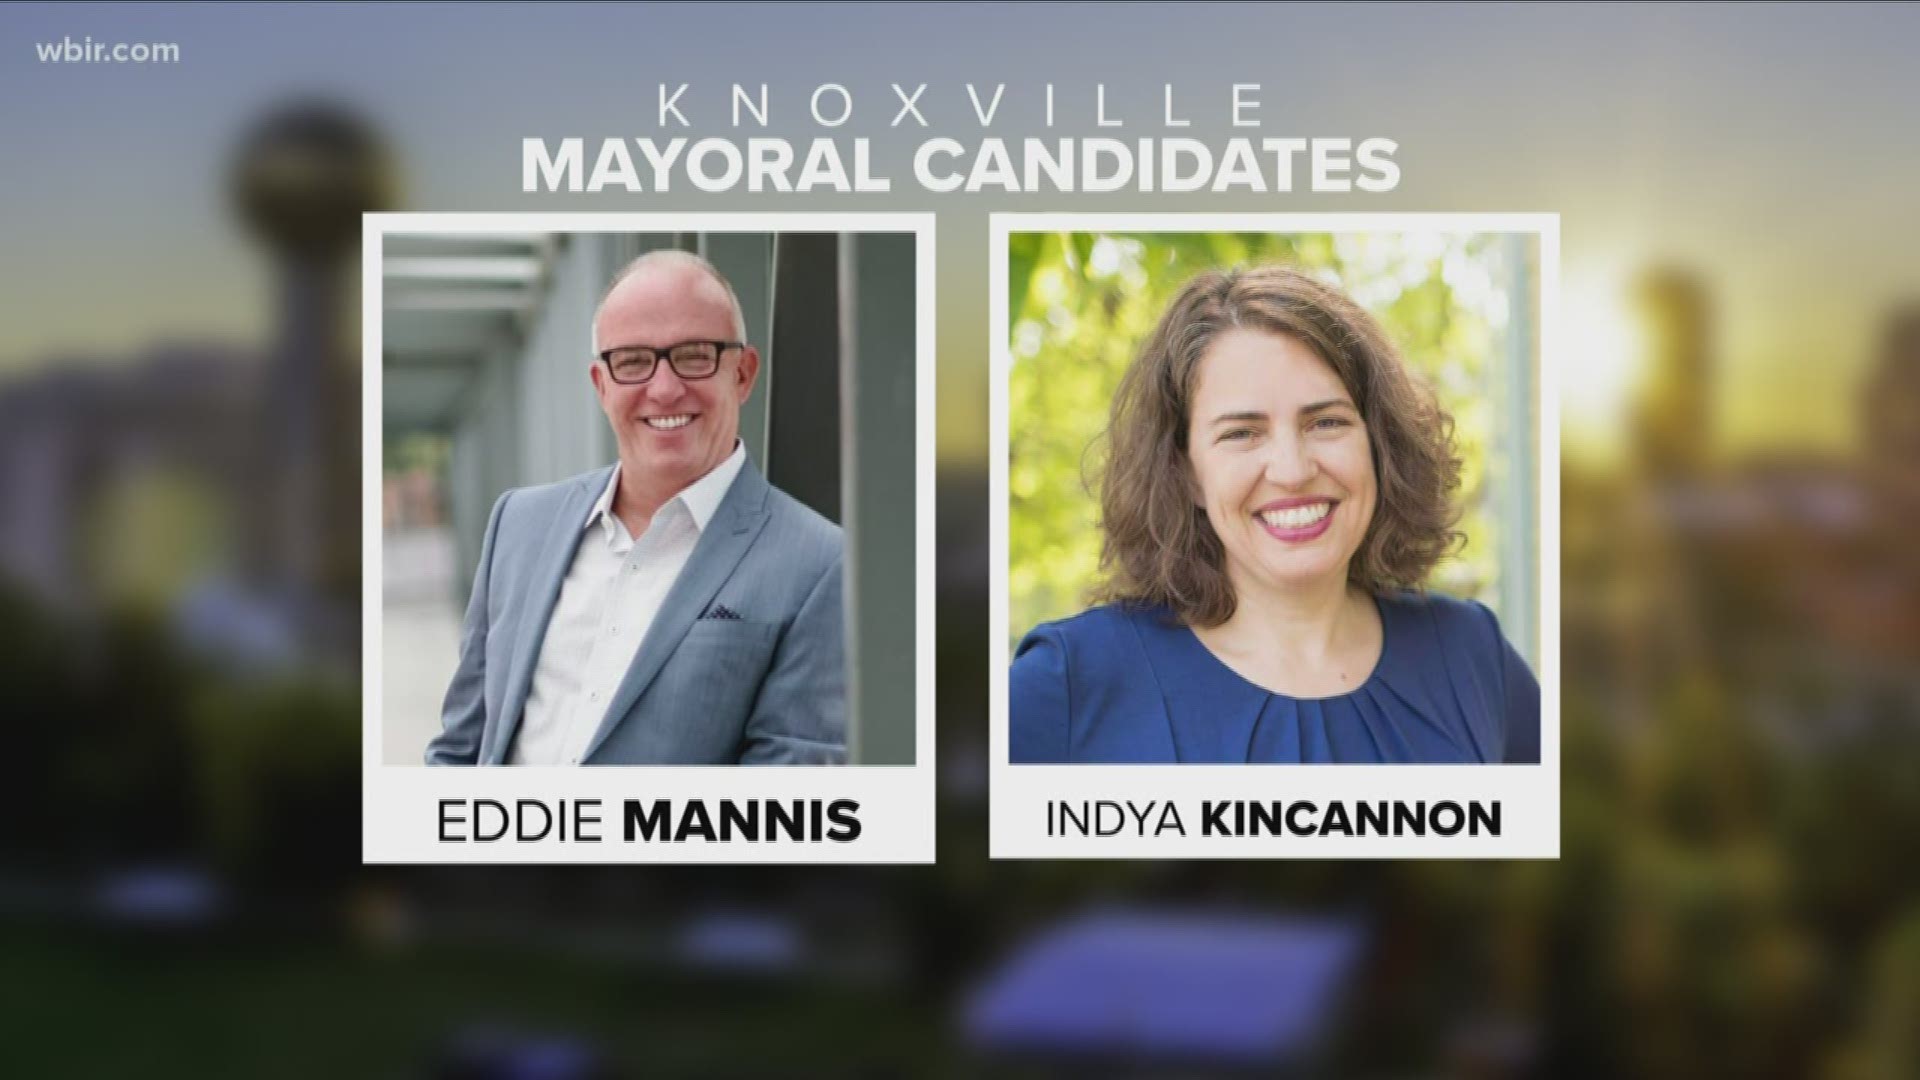 Both mayoral candidates announced some of their endorsements for the upcoming November election.